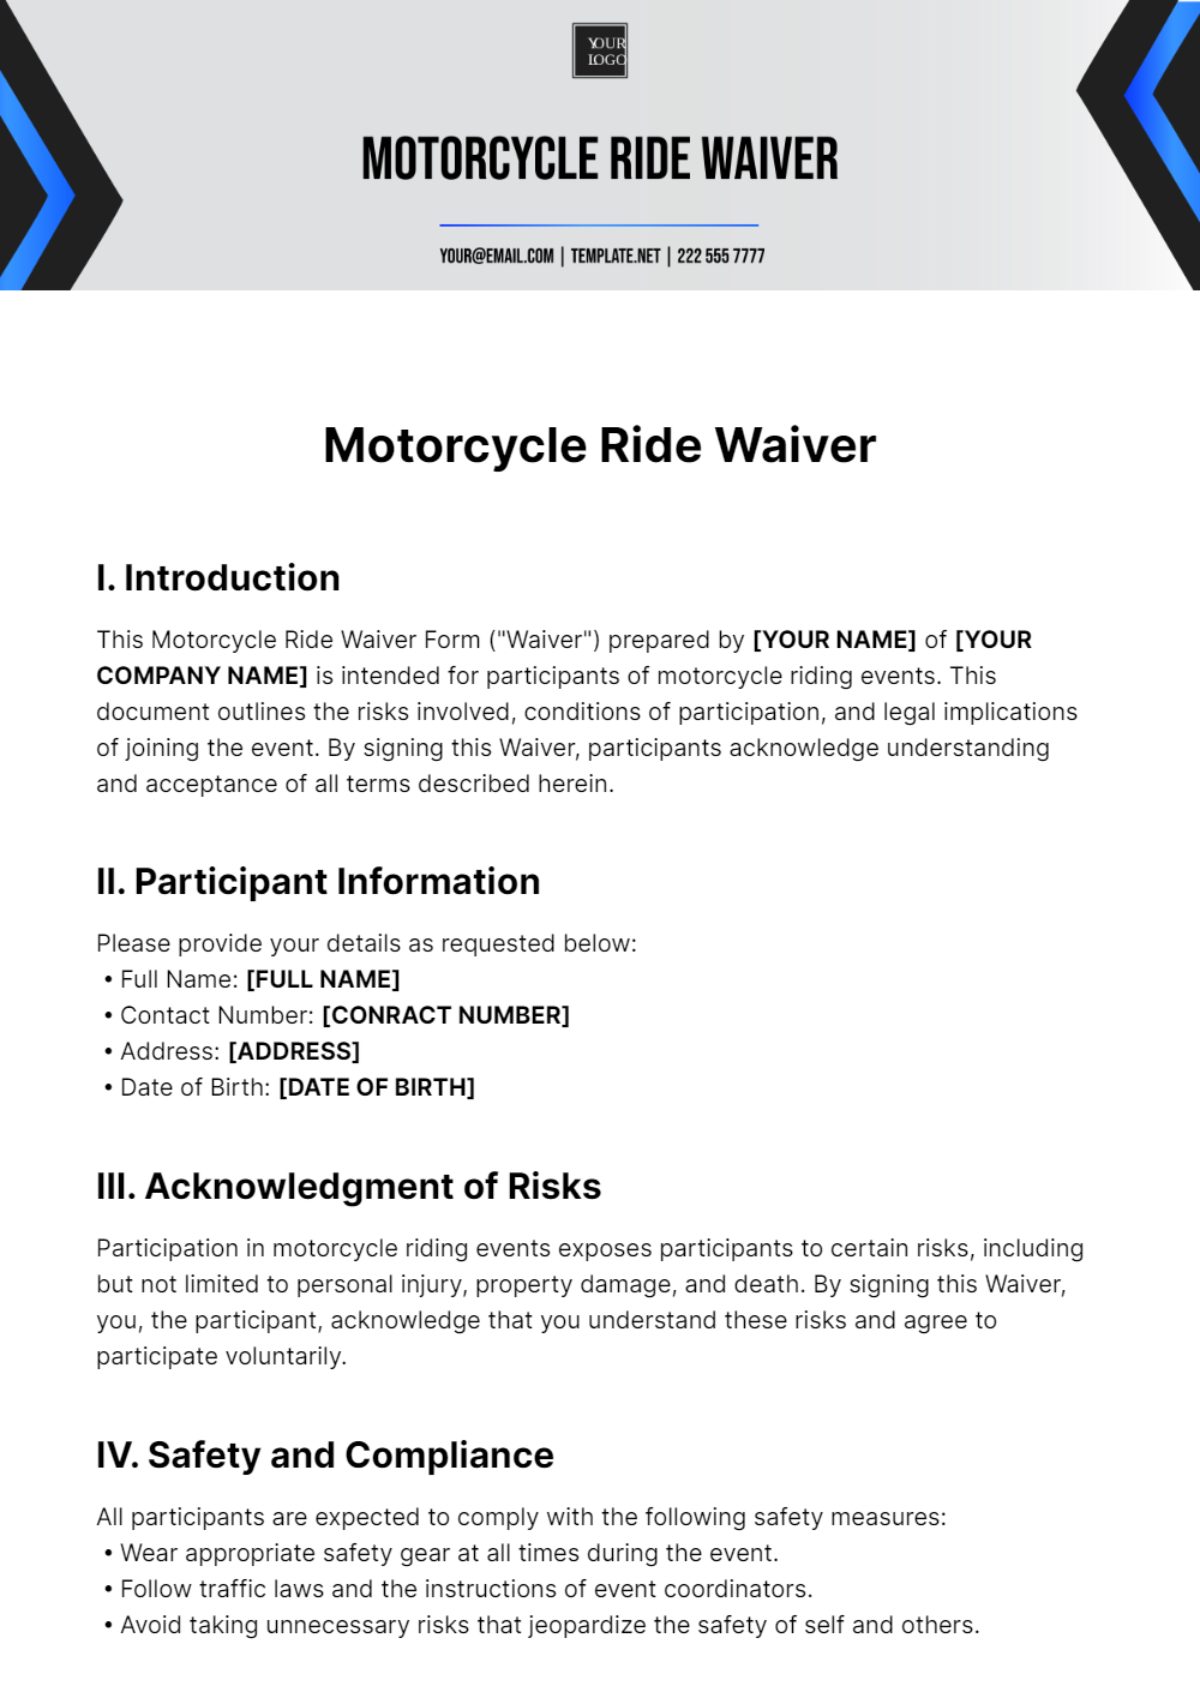 Motorcycle Ride Waiver Template